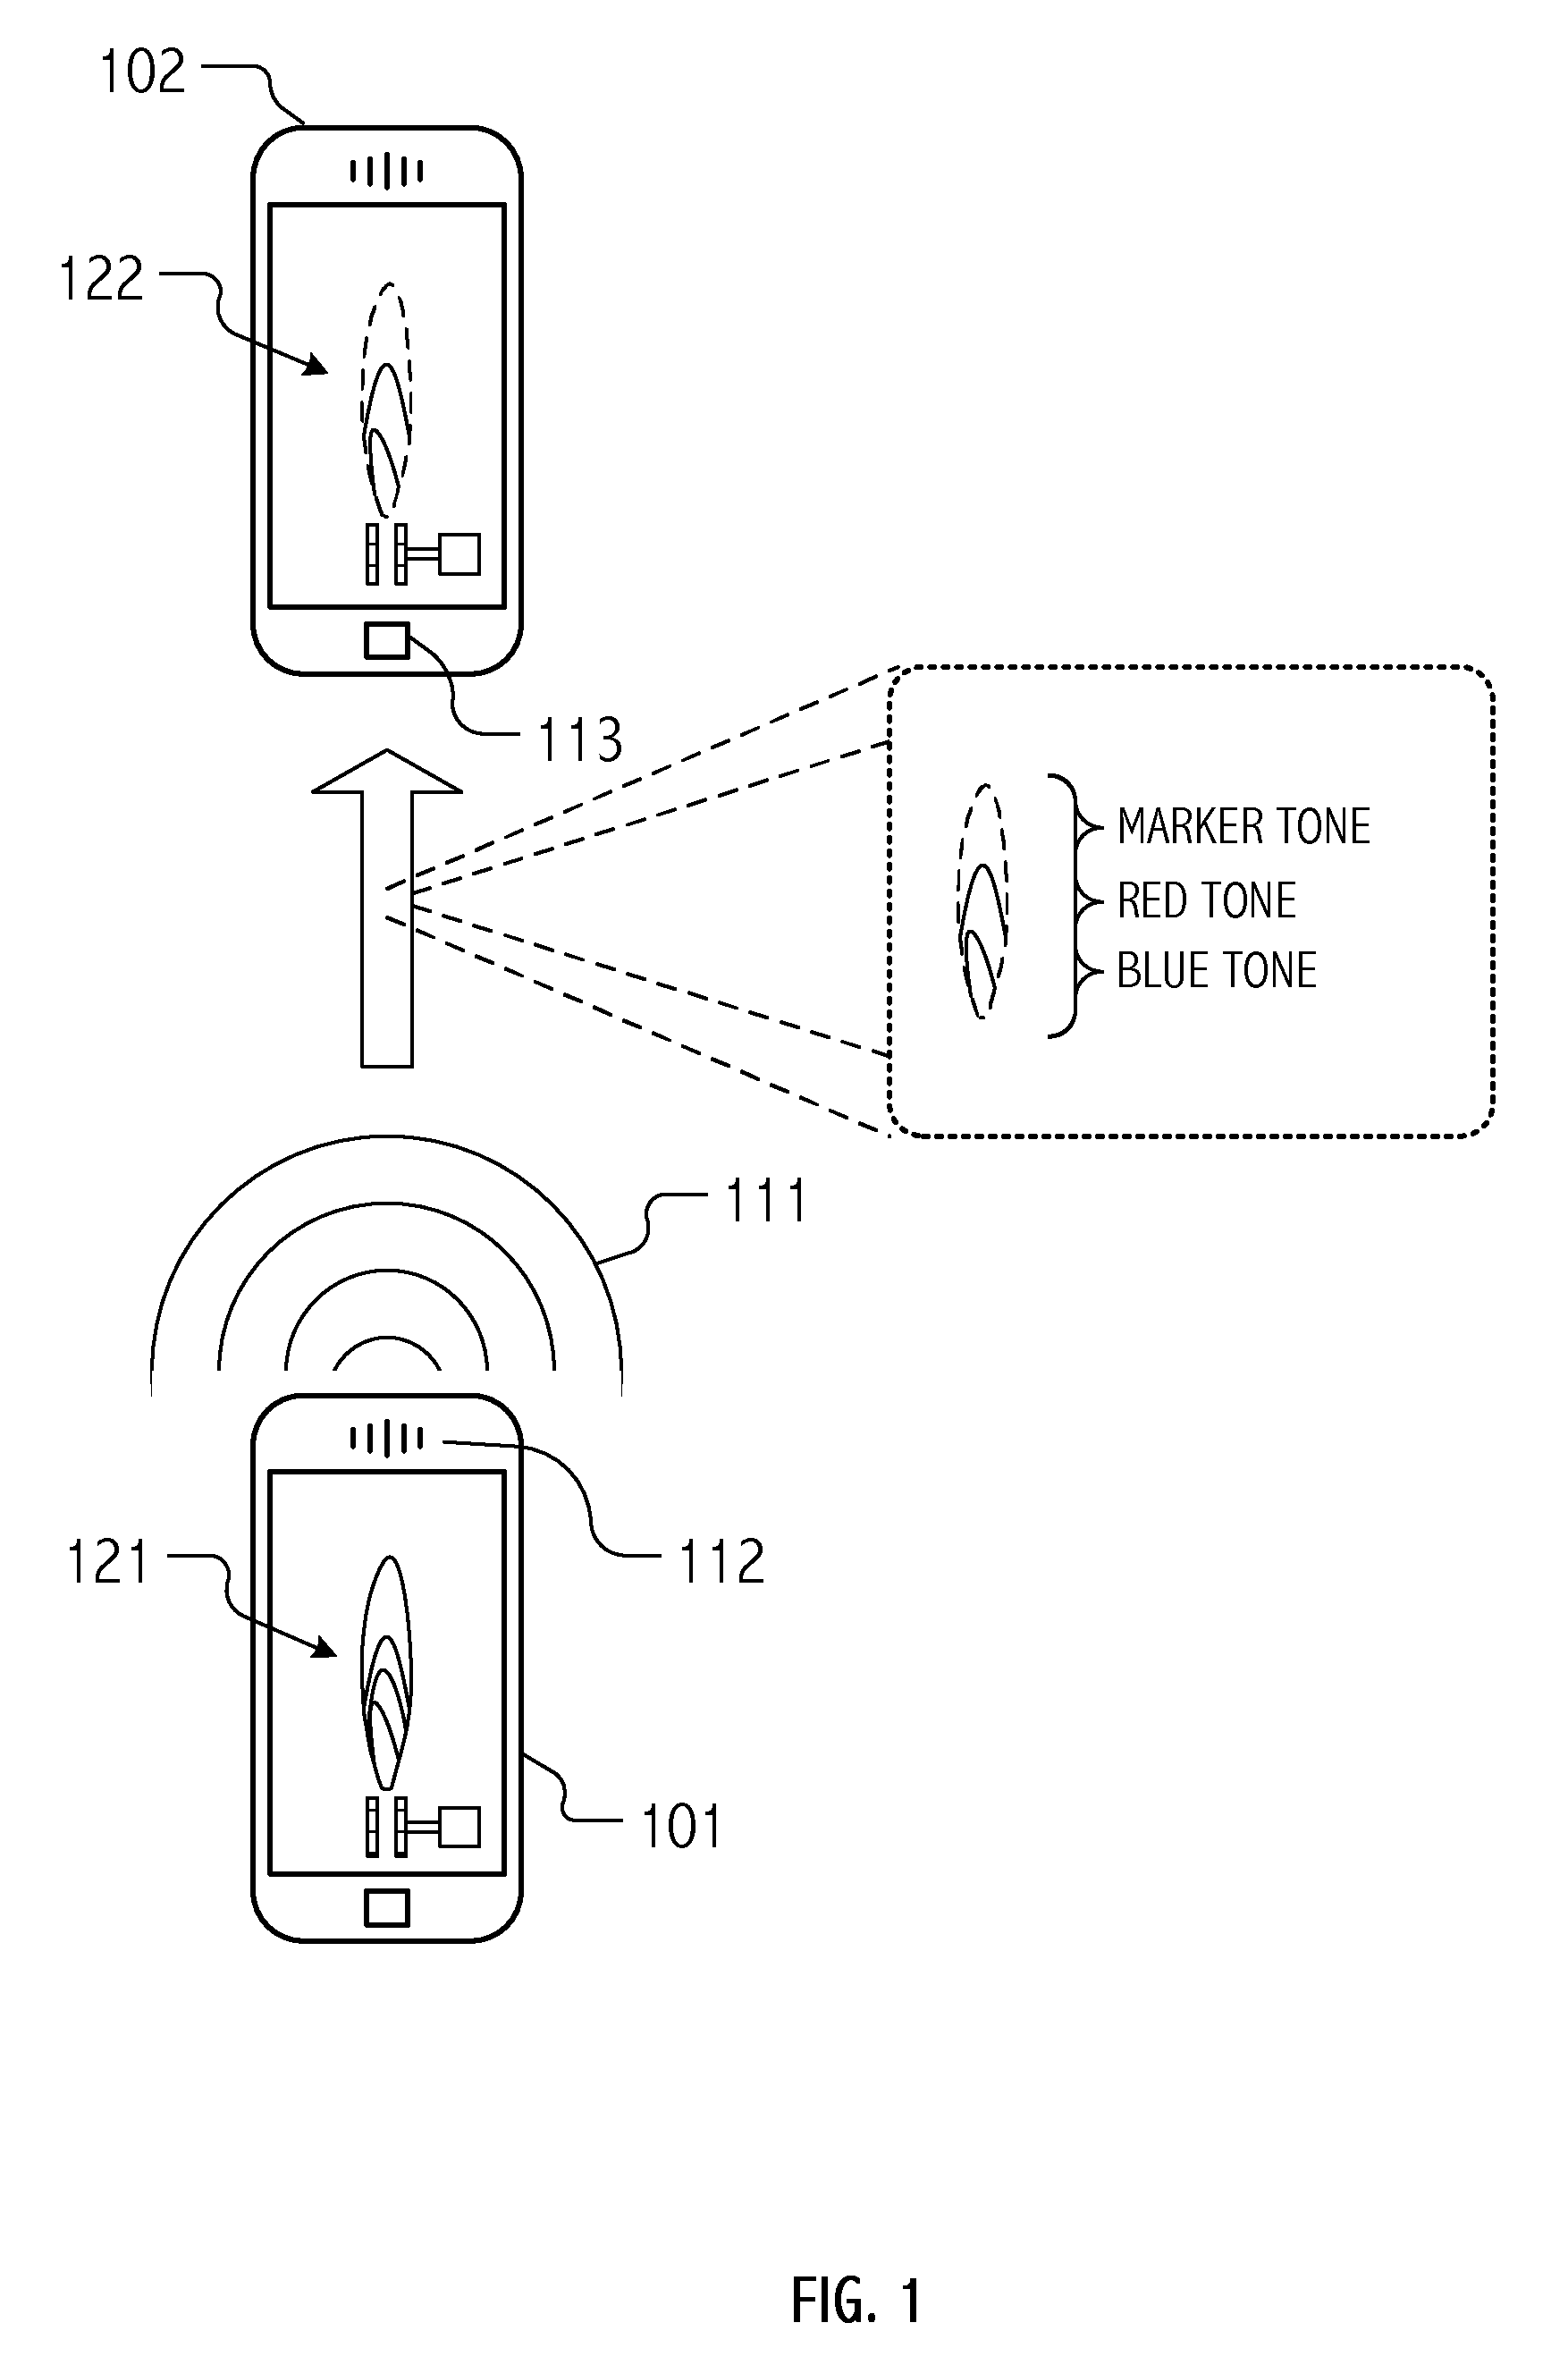 System and method for communication between mobile devices using digital/acoustic techniques